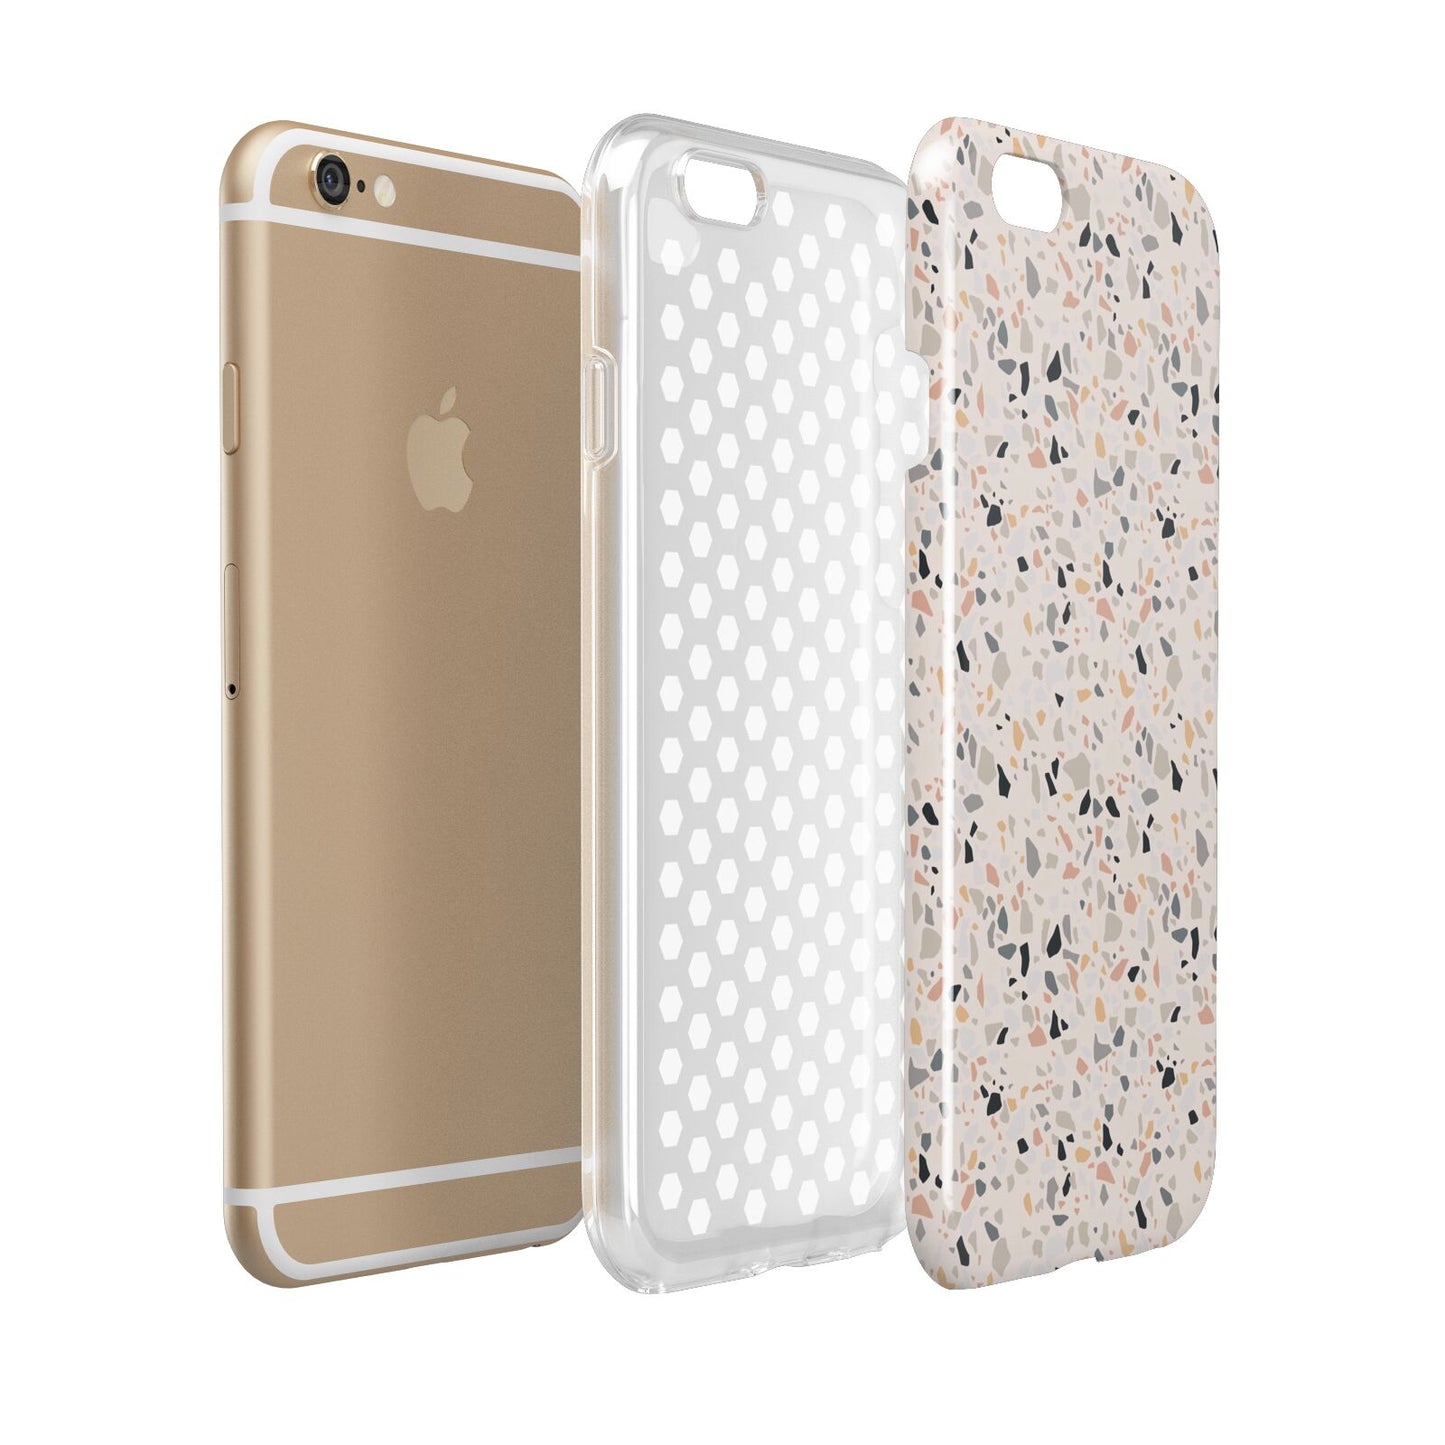 Terrazzo Stone Apple iPhone 6 3D Tough Case Expanded view